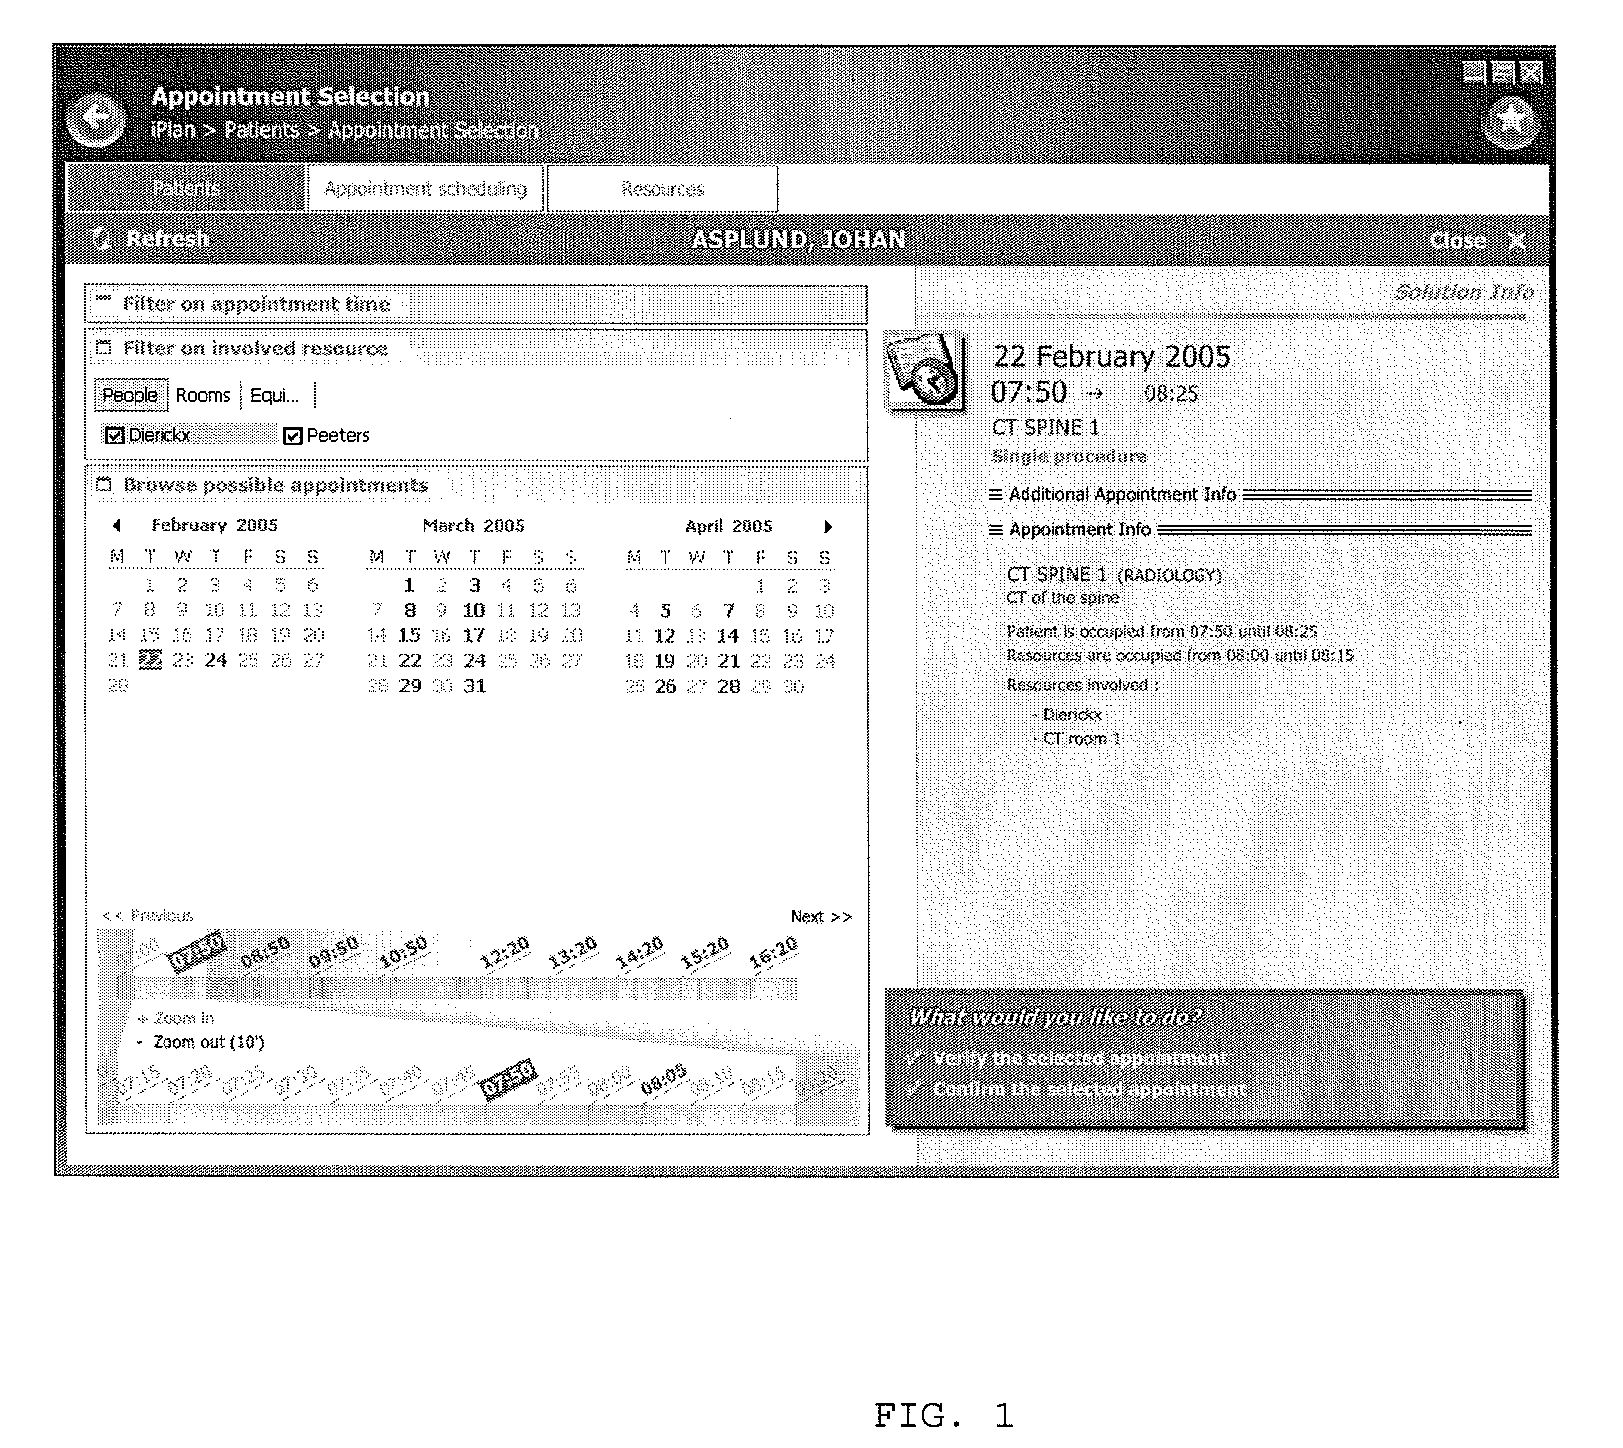 Method and User Interface For Managing and Displaying Solutions For Multiple Resources in an Appointment Scheduling System